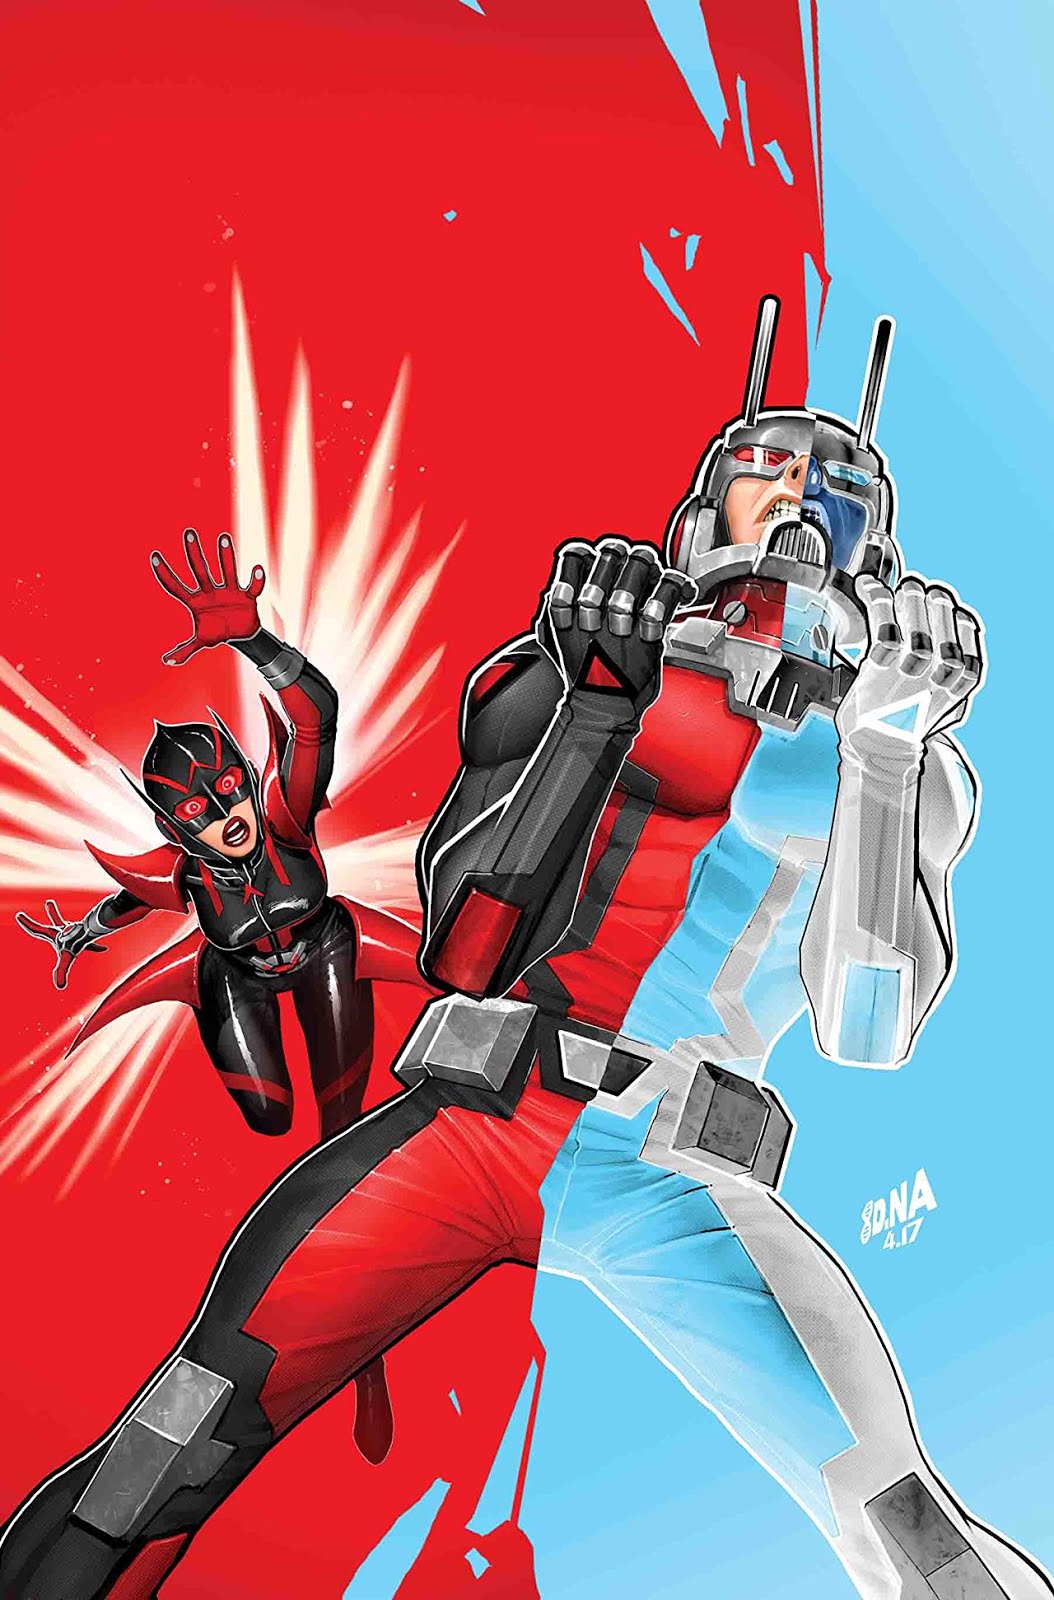 Ant-Man & The Wasp #4